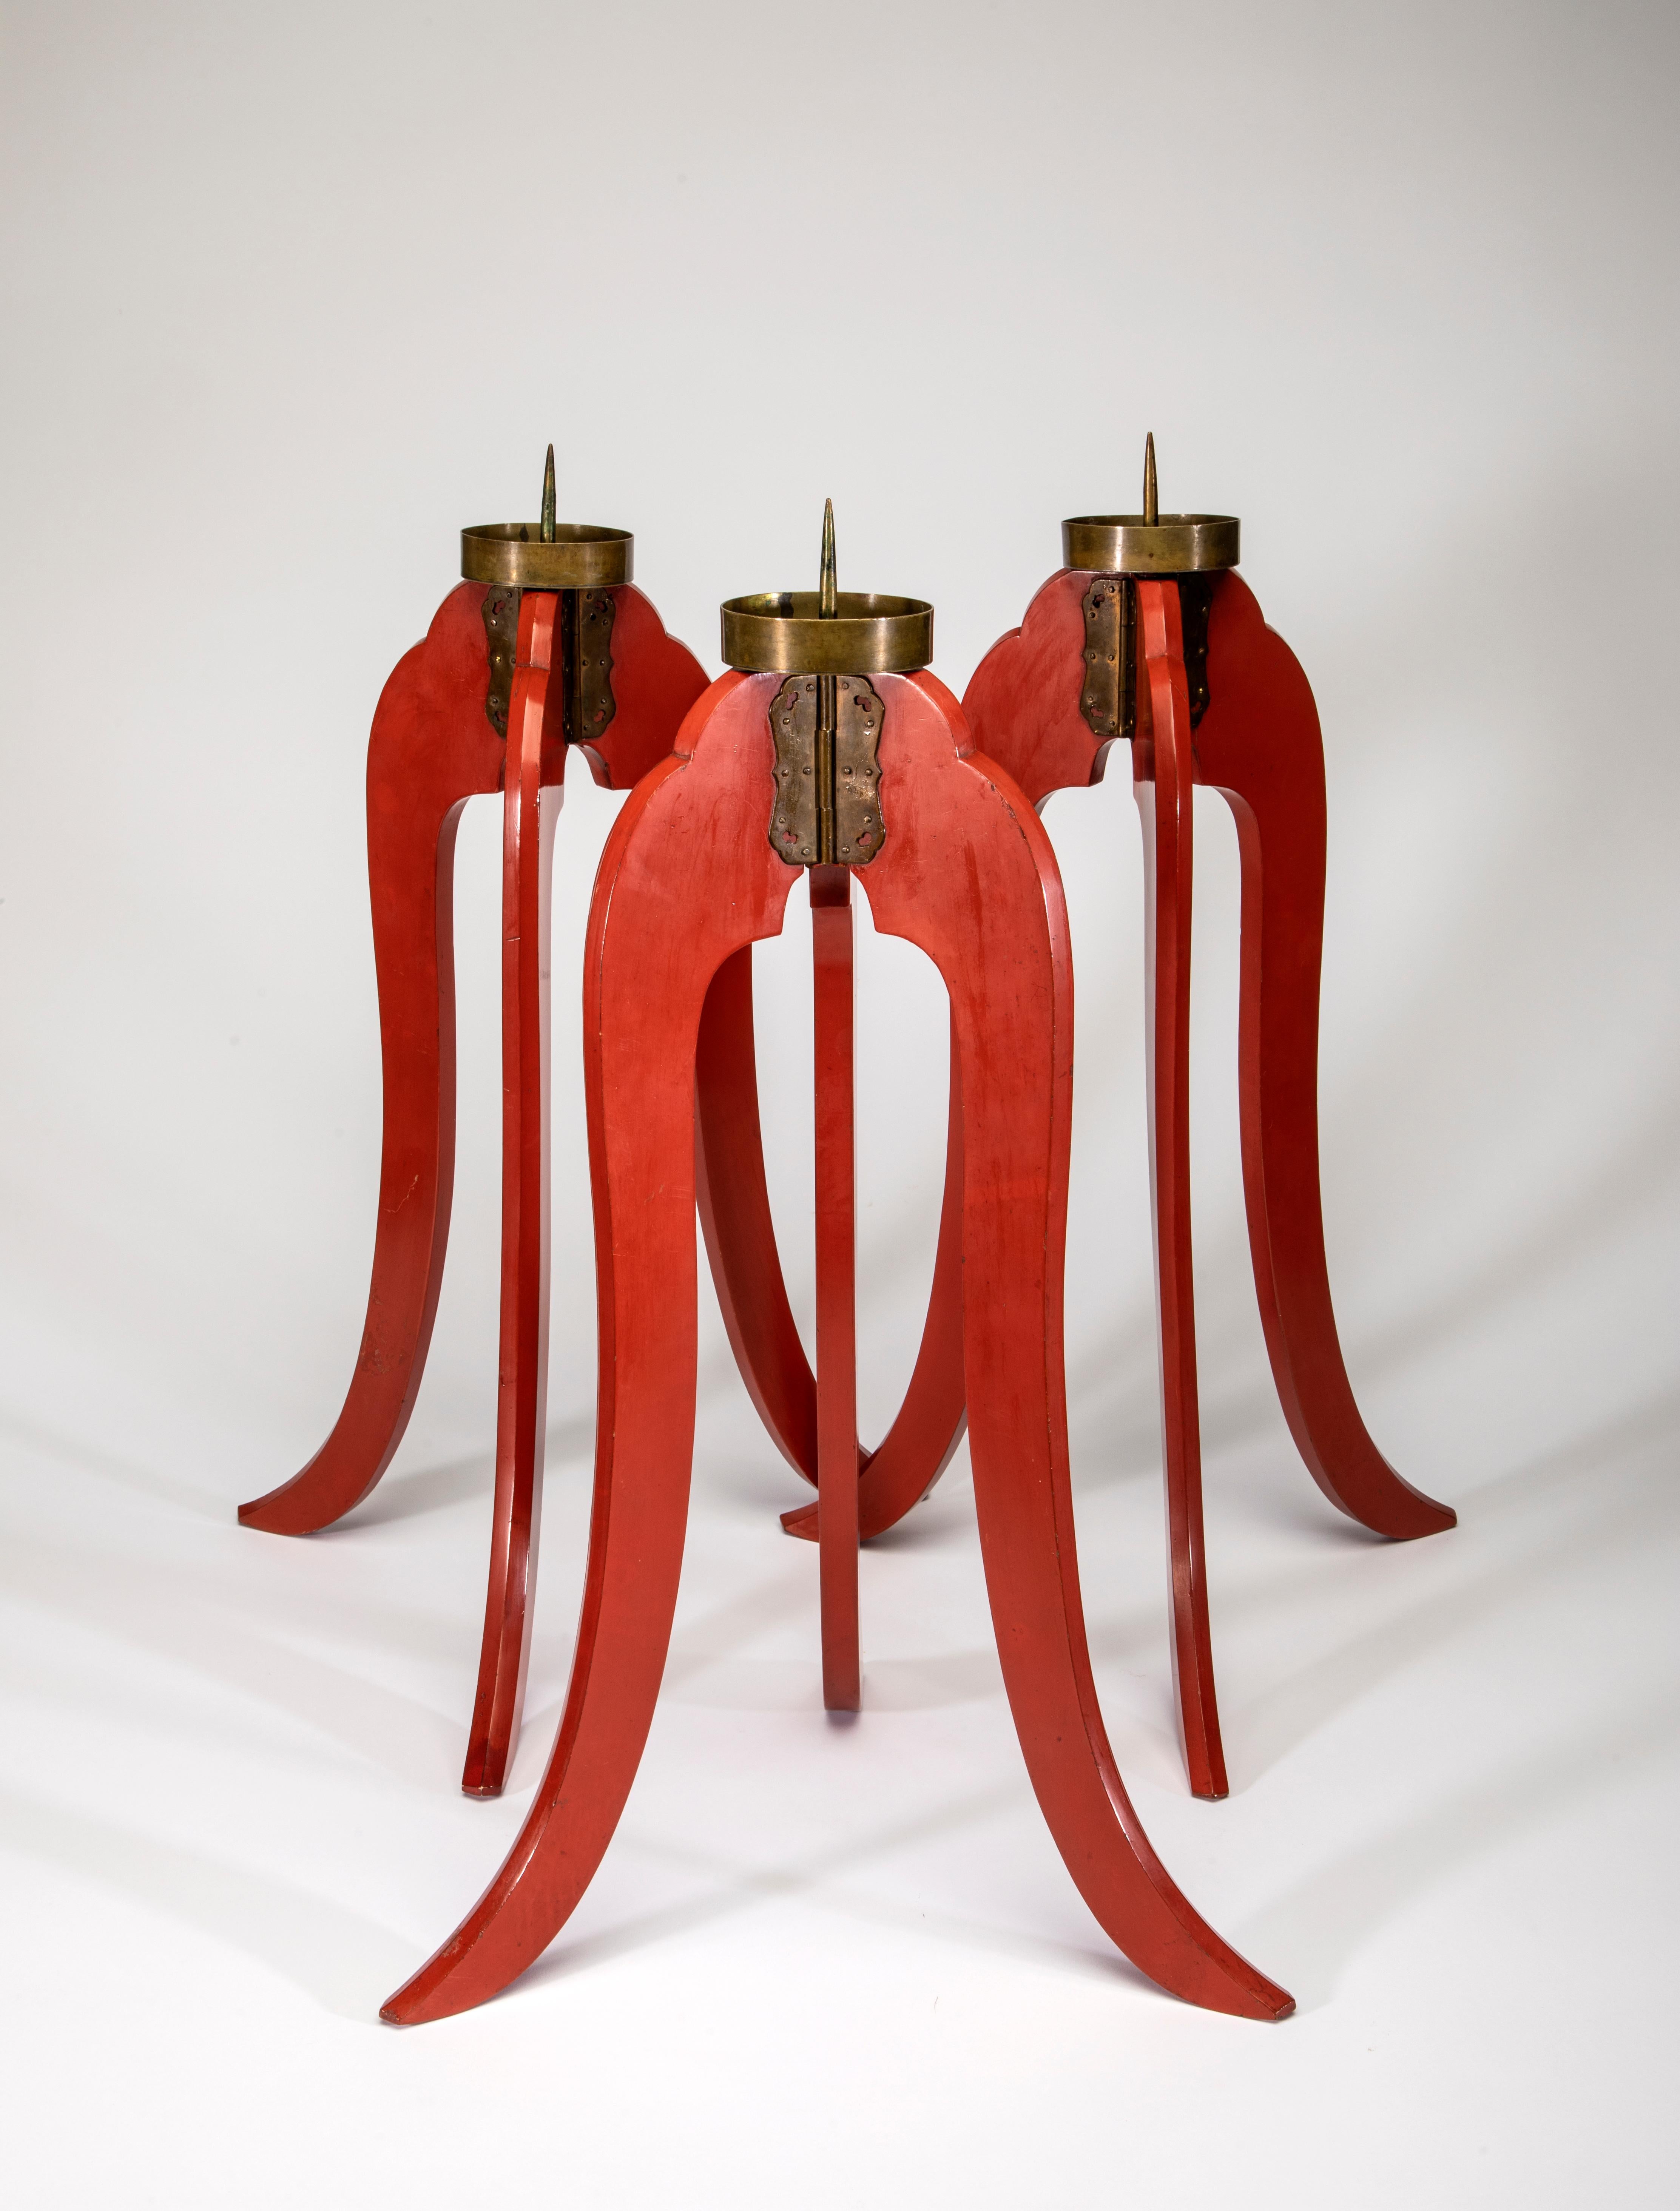 3 Japanese red Lacquer candlesticks
Many coats of persimmon/red lacquer applied to wood
Brass cap end fittings
Elegant bevel-cut on front-edge of each leg
Fold for storage (see last image/photo)
Late Meiji Period 1900 – 1912
Excellent